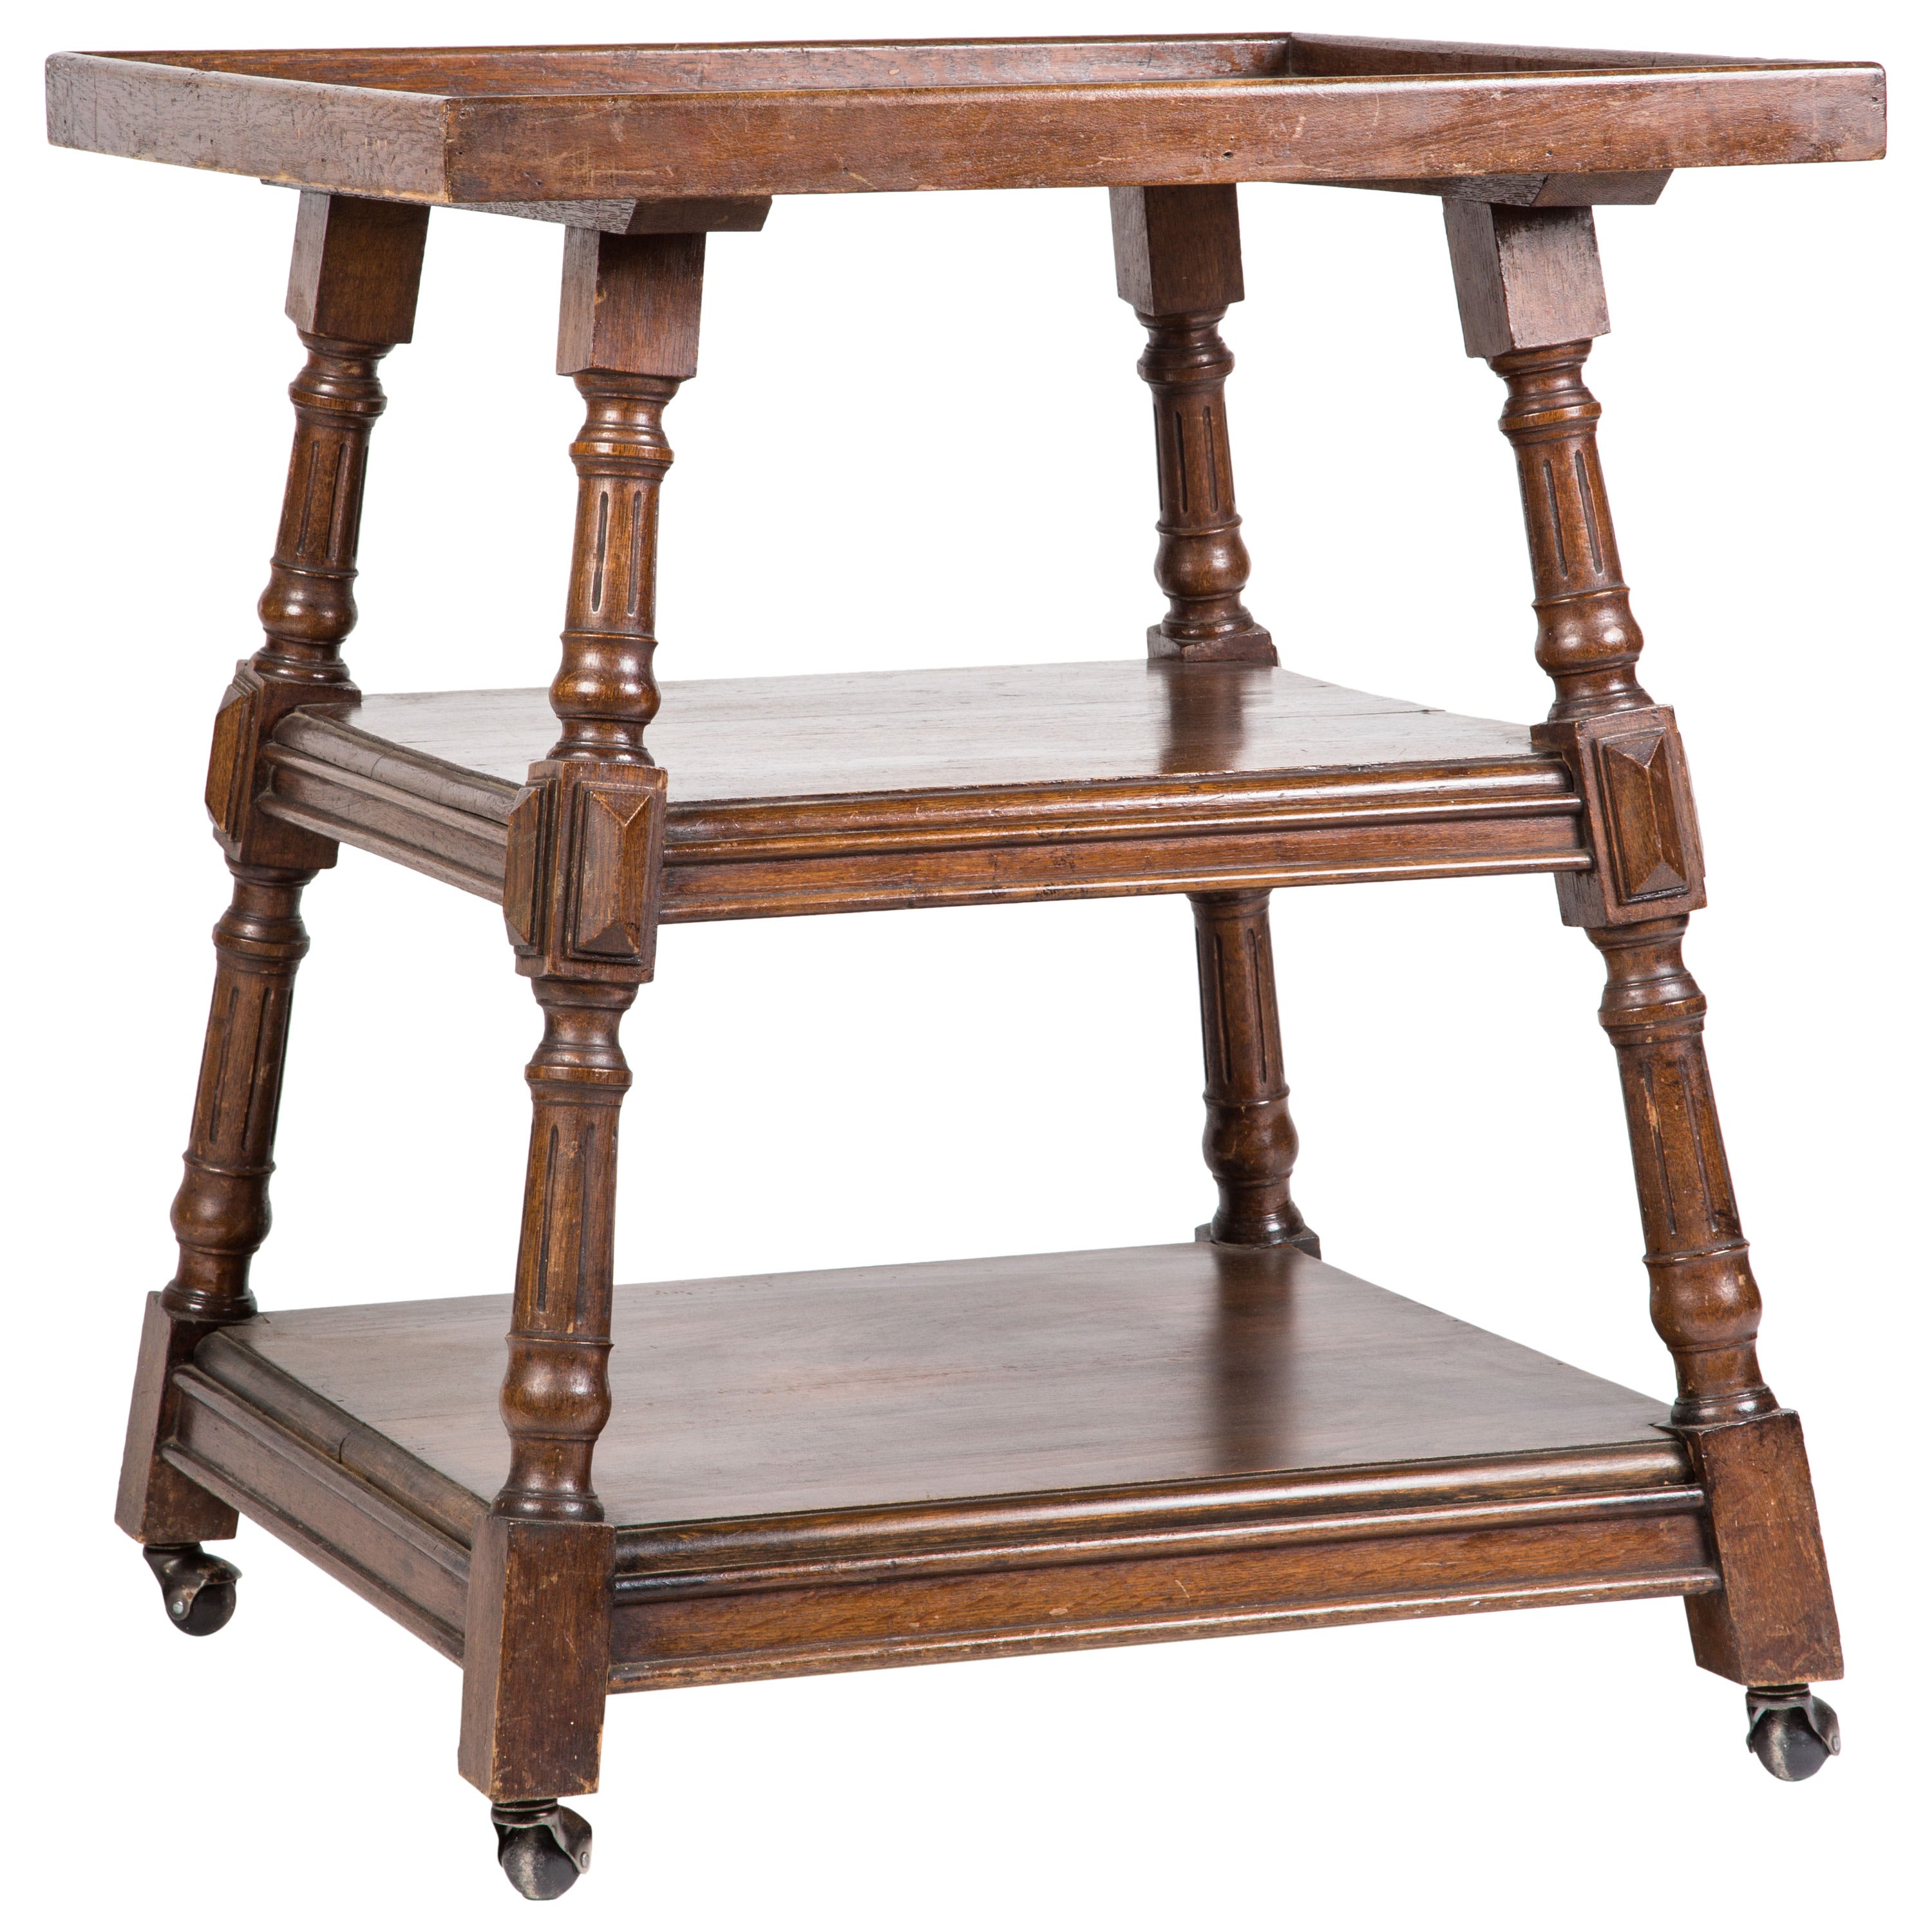 Three-Tiered Square Table For Sale